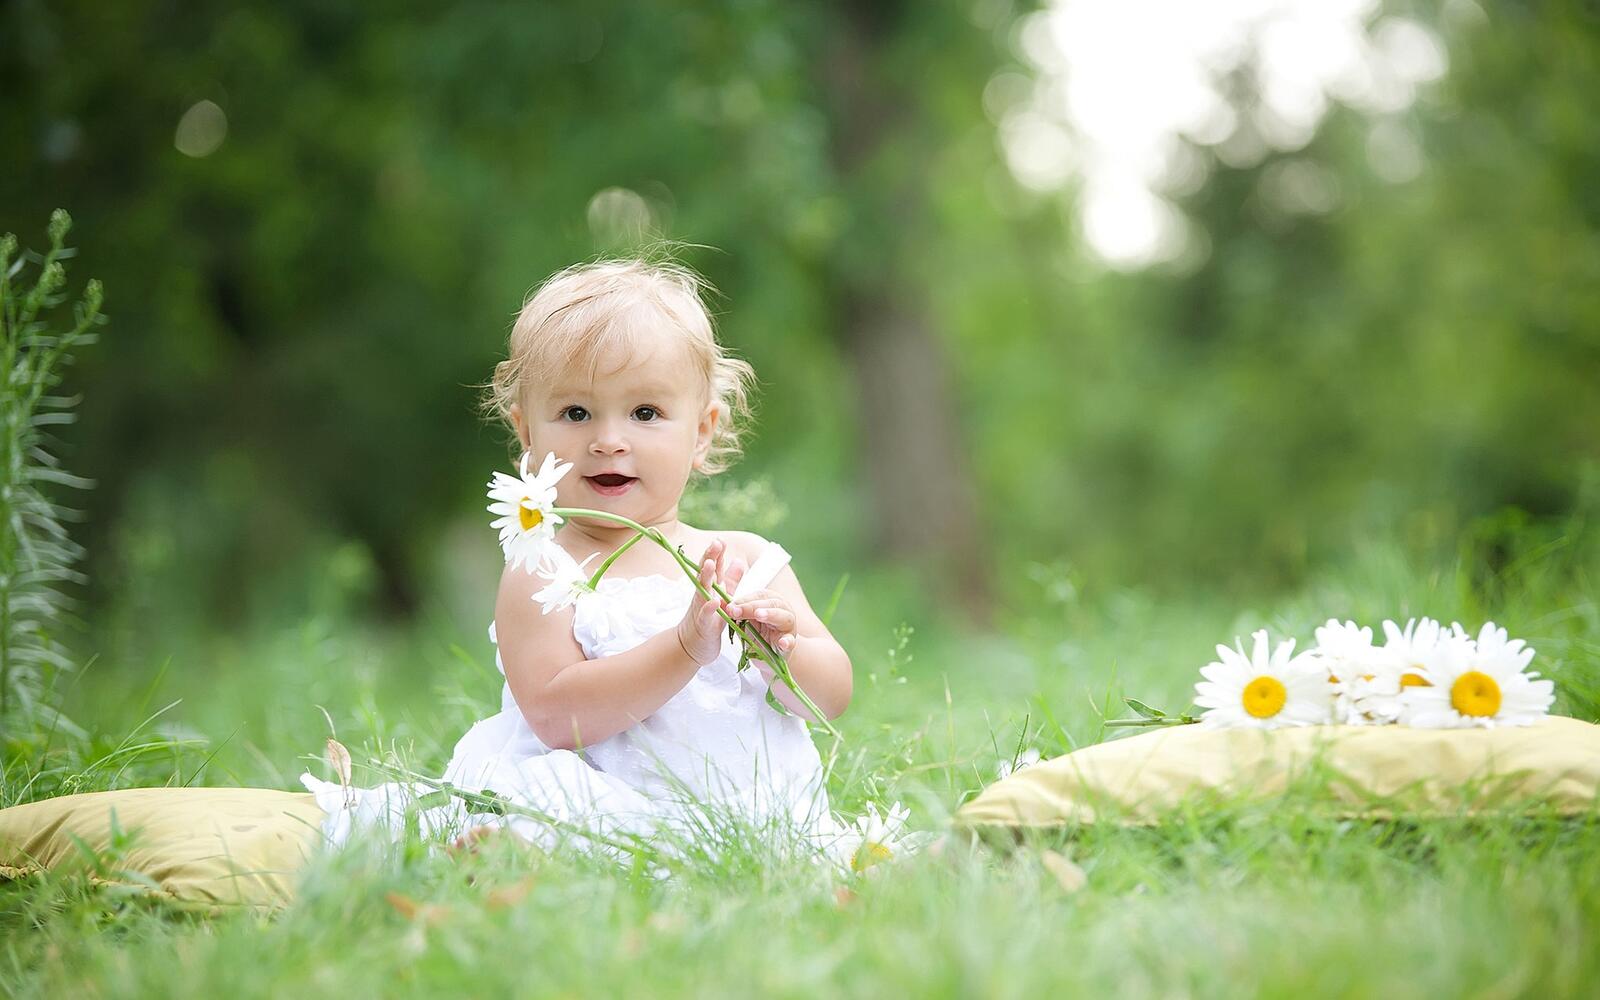 Free photo A little girl in a white dress sits in a green meadow